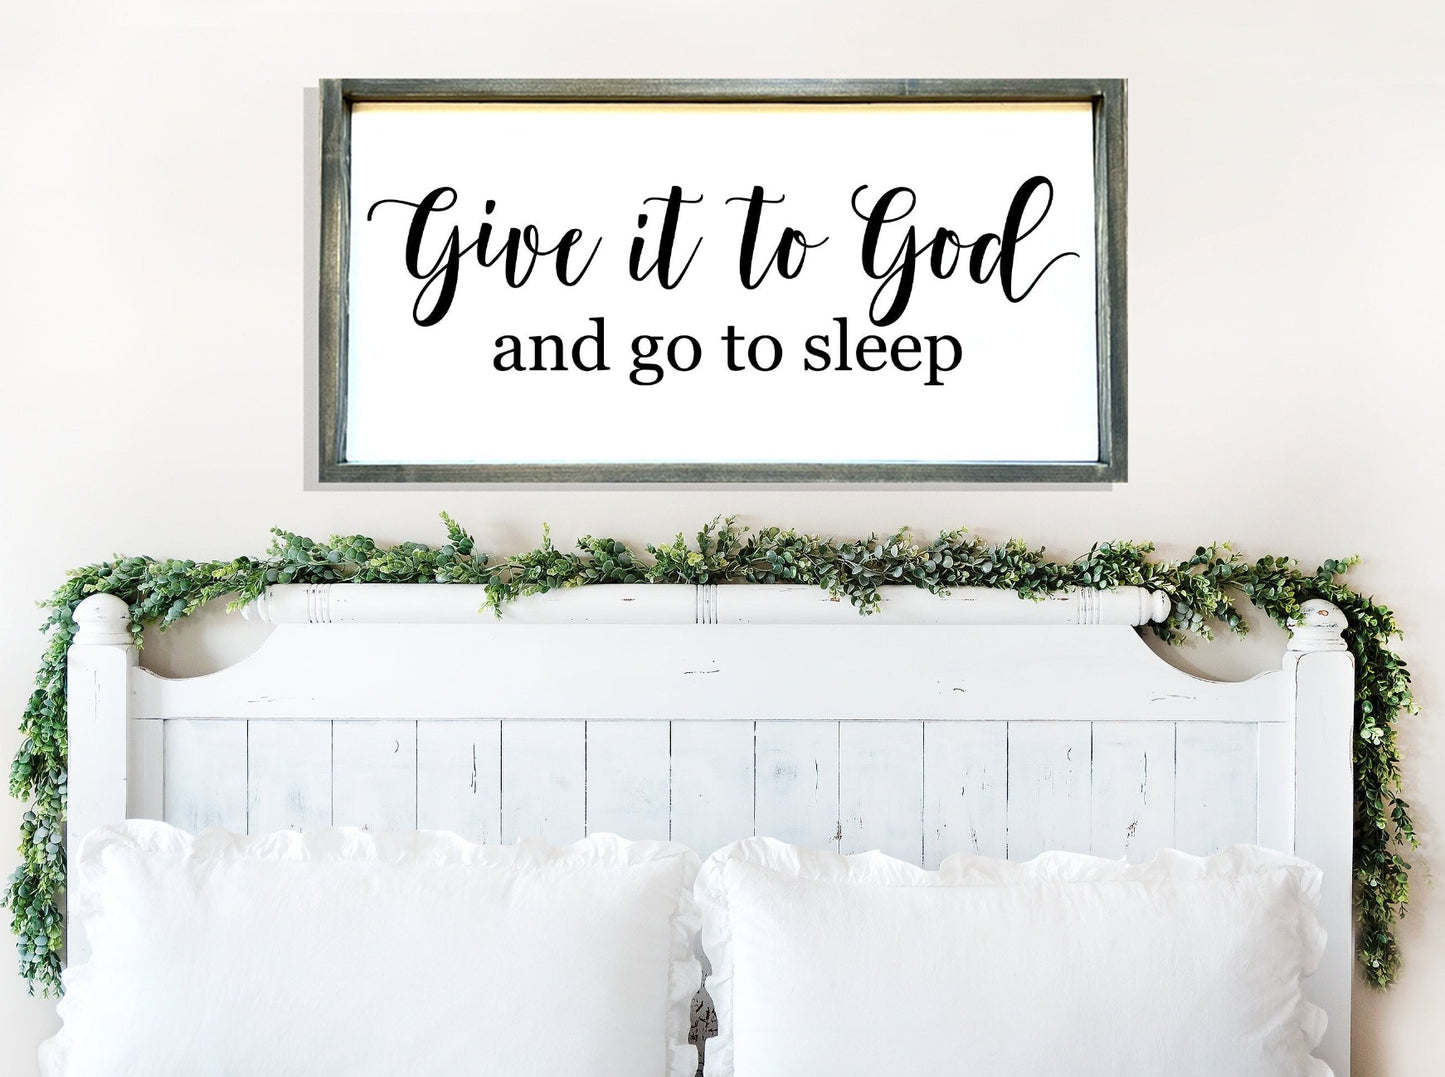 Give it to god and go to sleep bedroom sign.